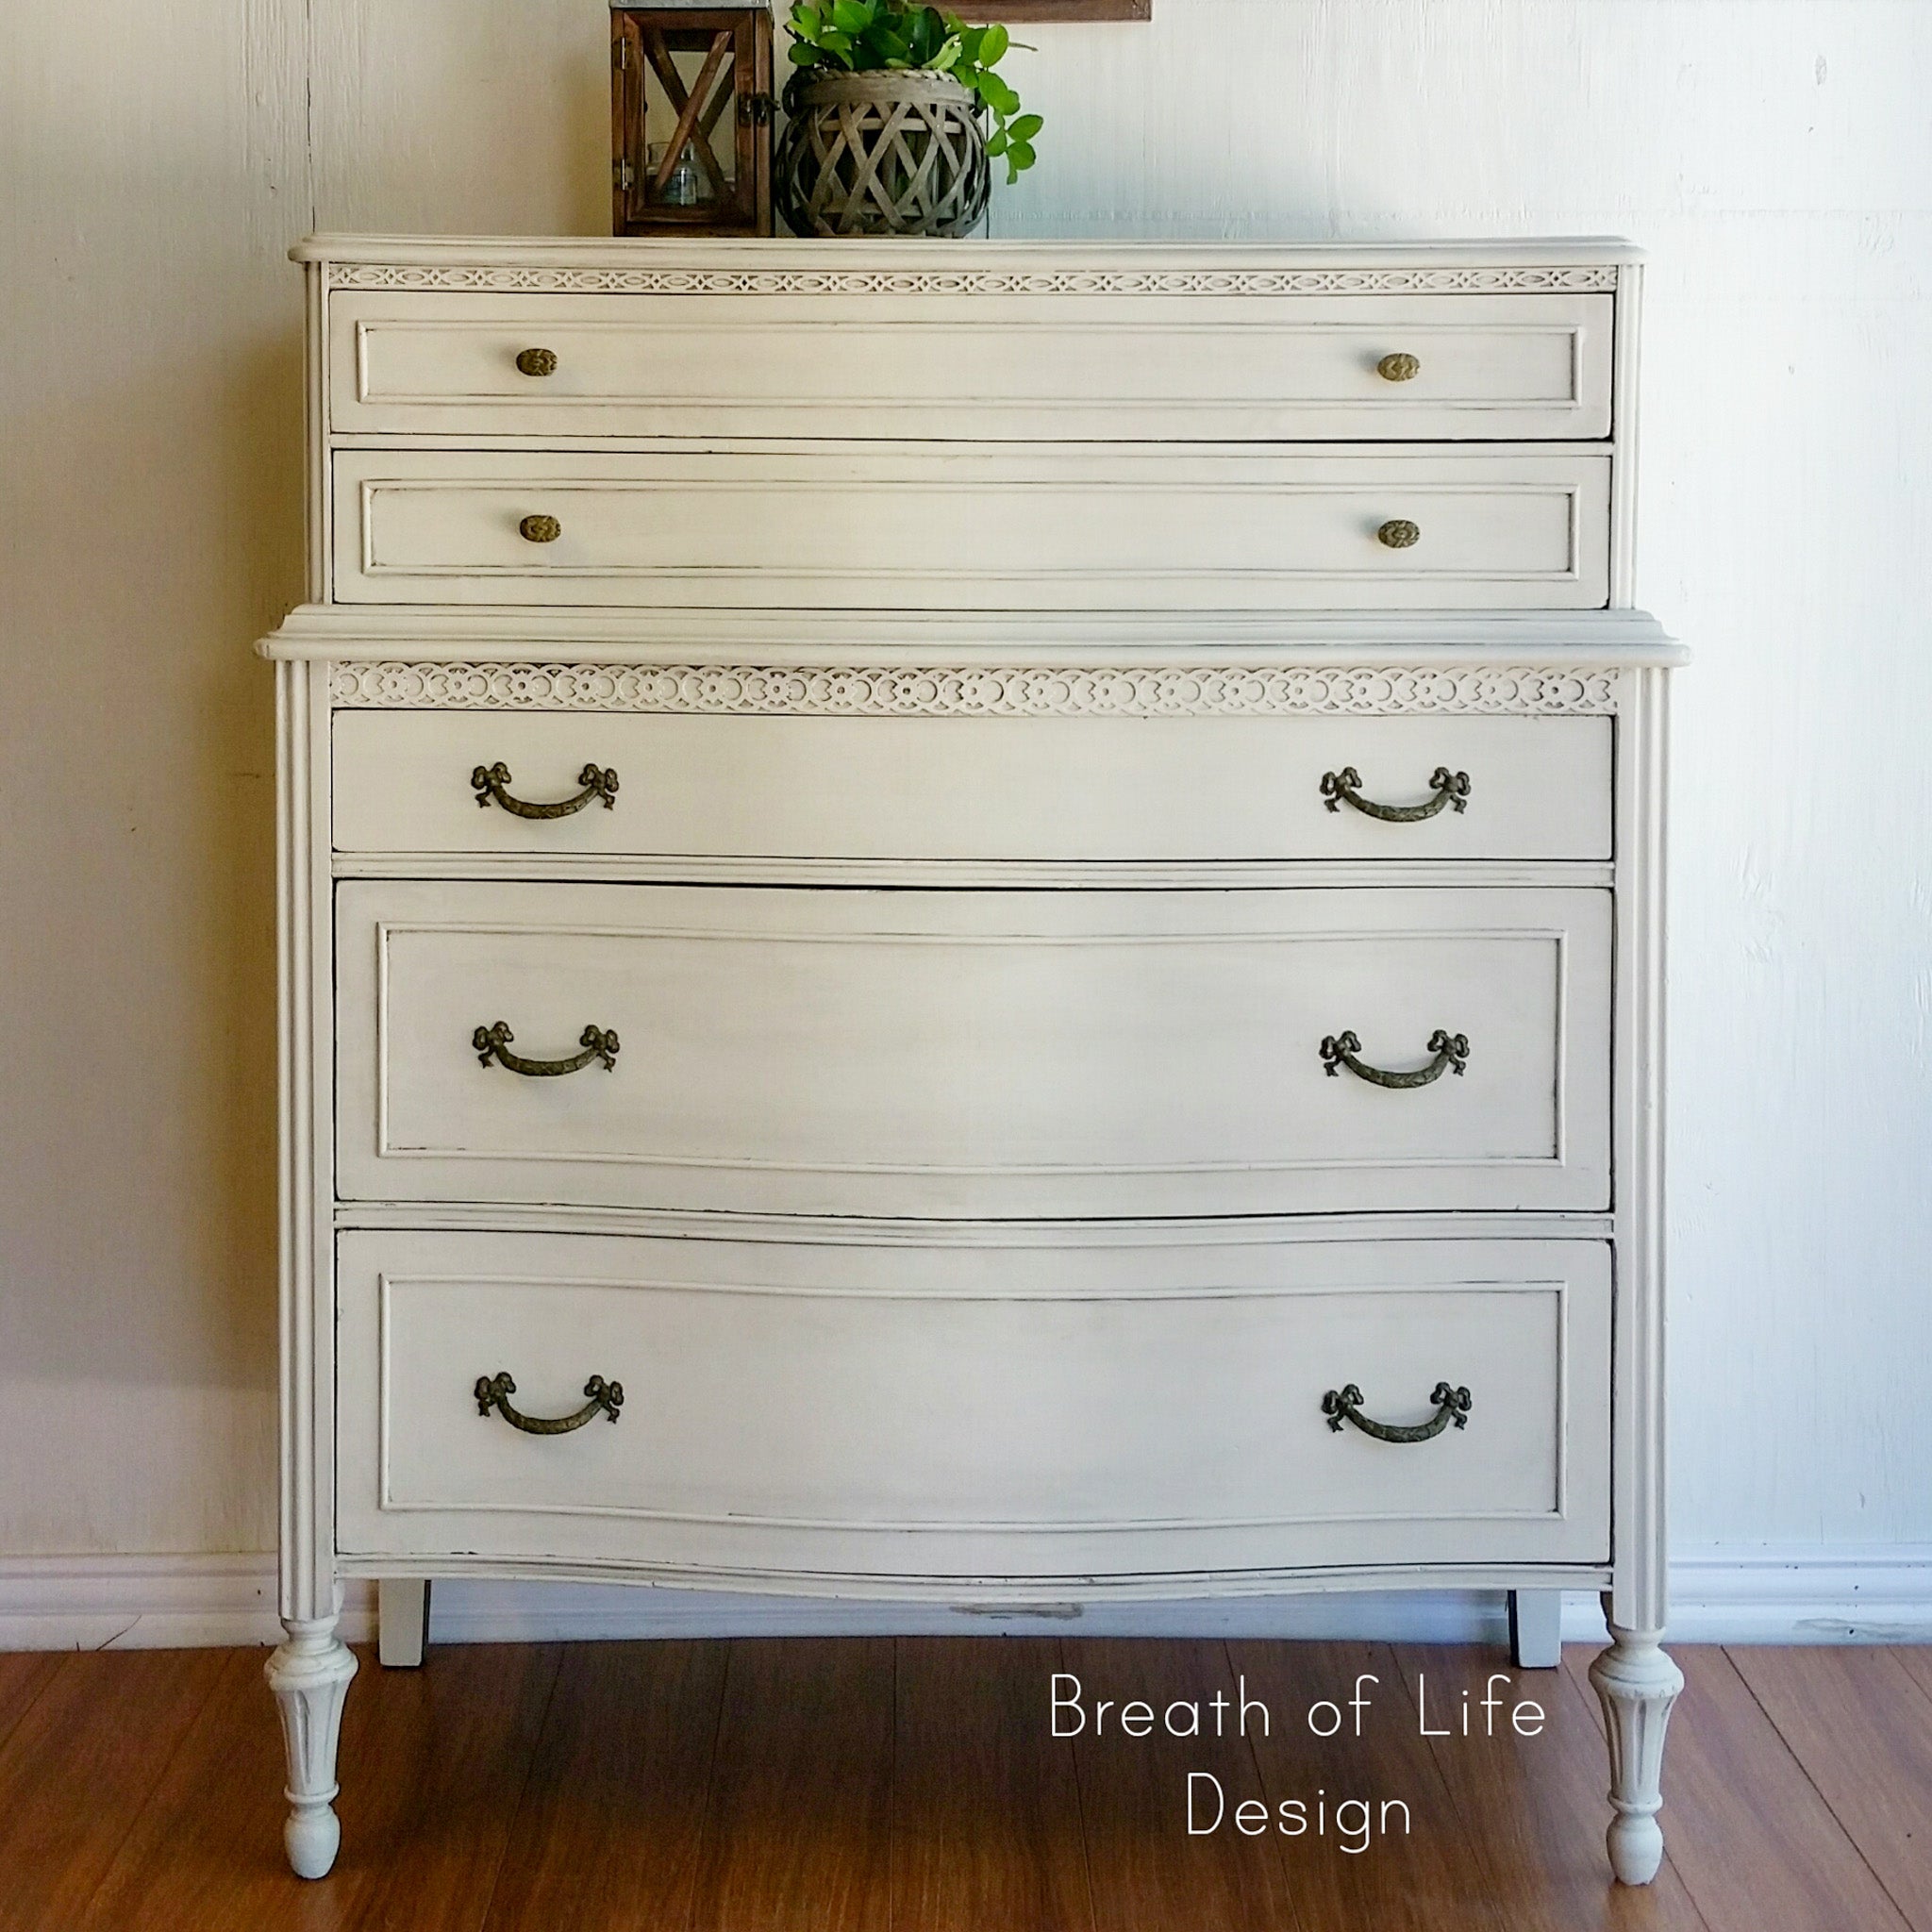 A vintage 5-drawer chest dresser refurbished by Breath of Life Design is painted in Dixie Belle's Drop Cloth chalk mineral paint.